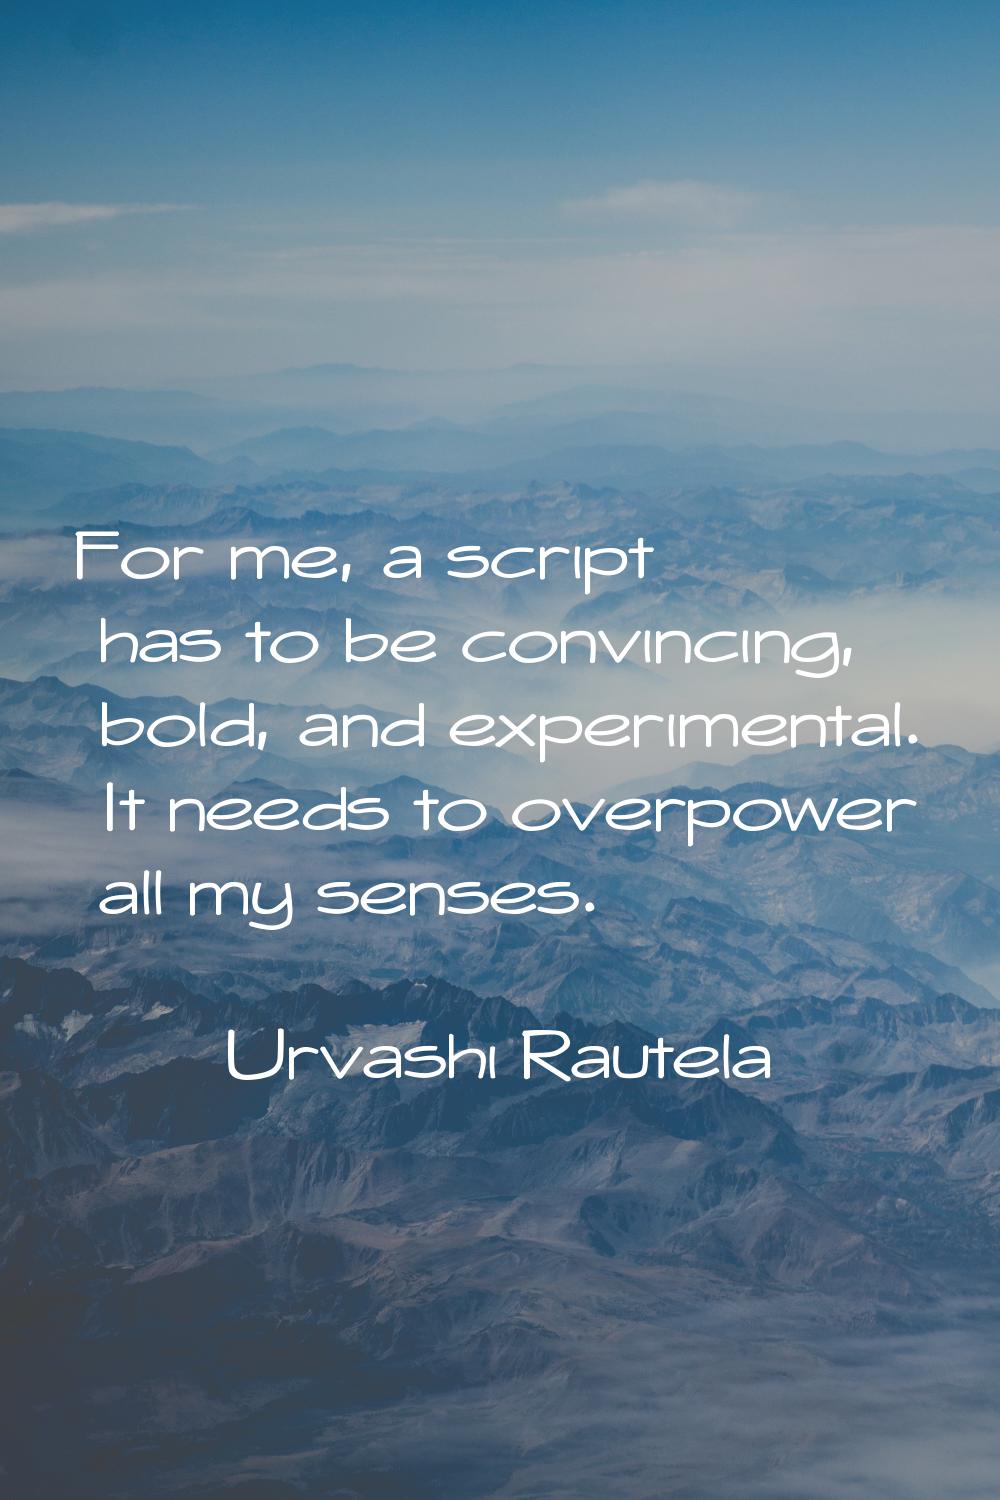 For me, a script has to be convincing, bold, and experimental. It needs to overpower all my senses.